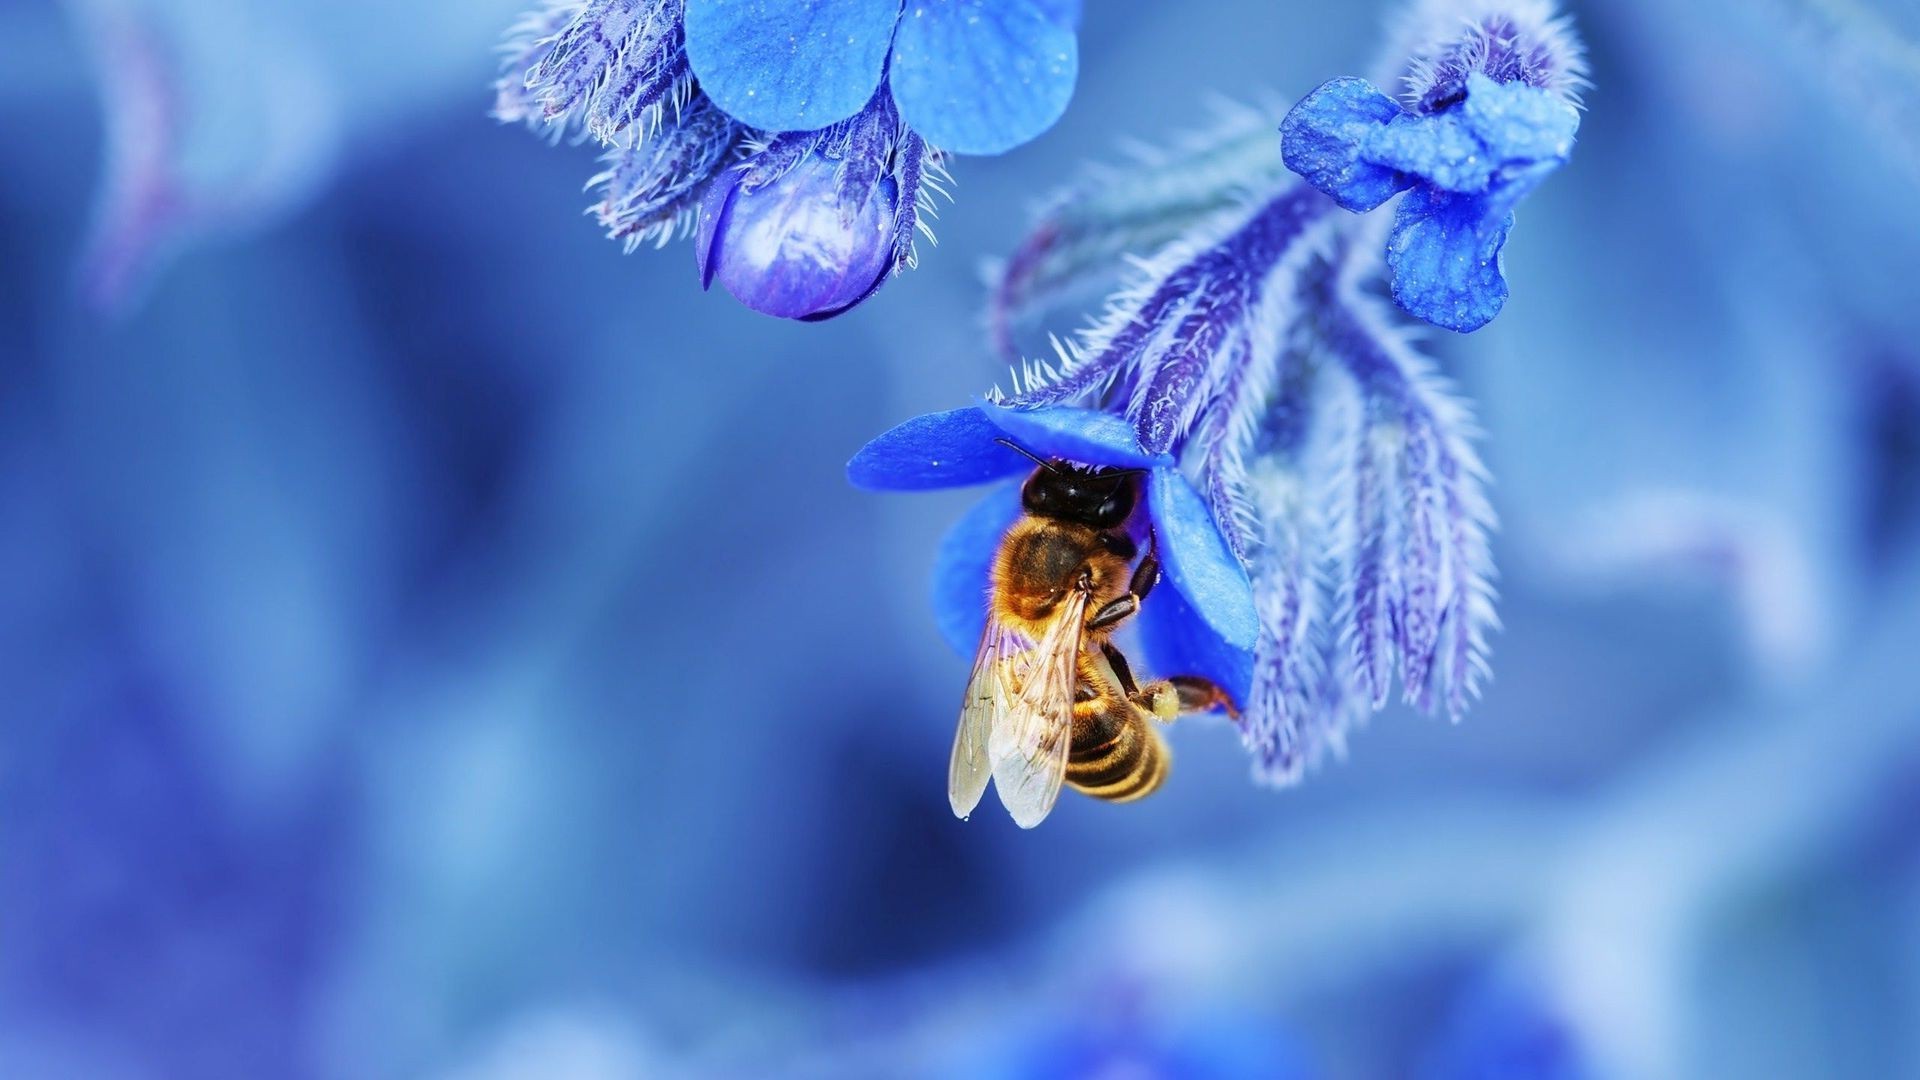 nature, Macro, Depth Of Field, Bees, Insect, Flowers, Blue, Blossoms, Wings Wallpaper